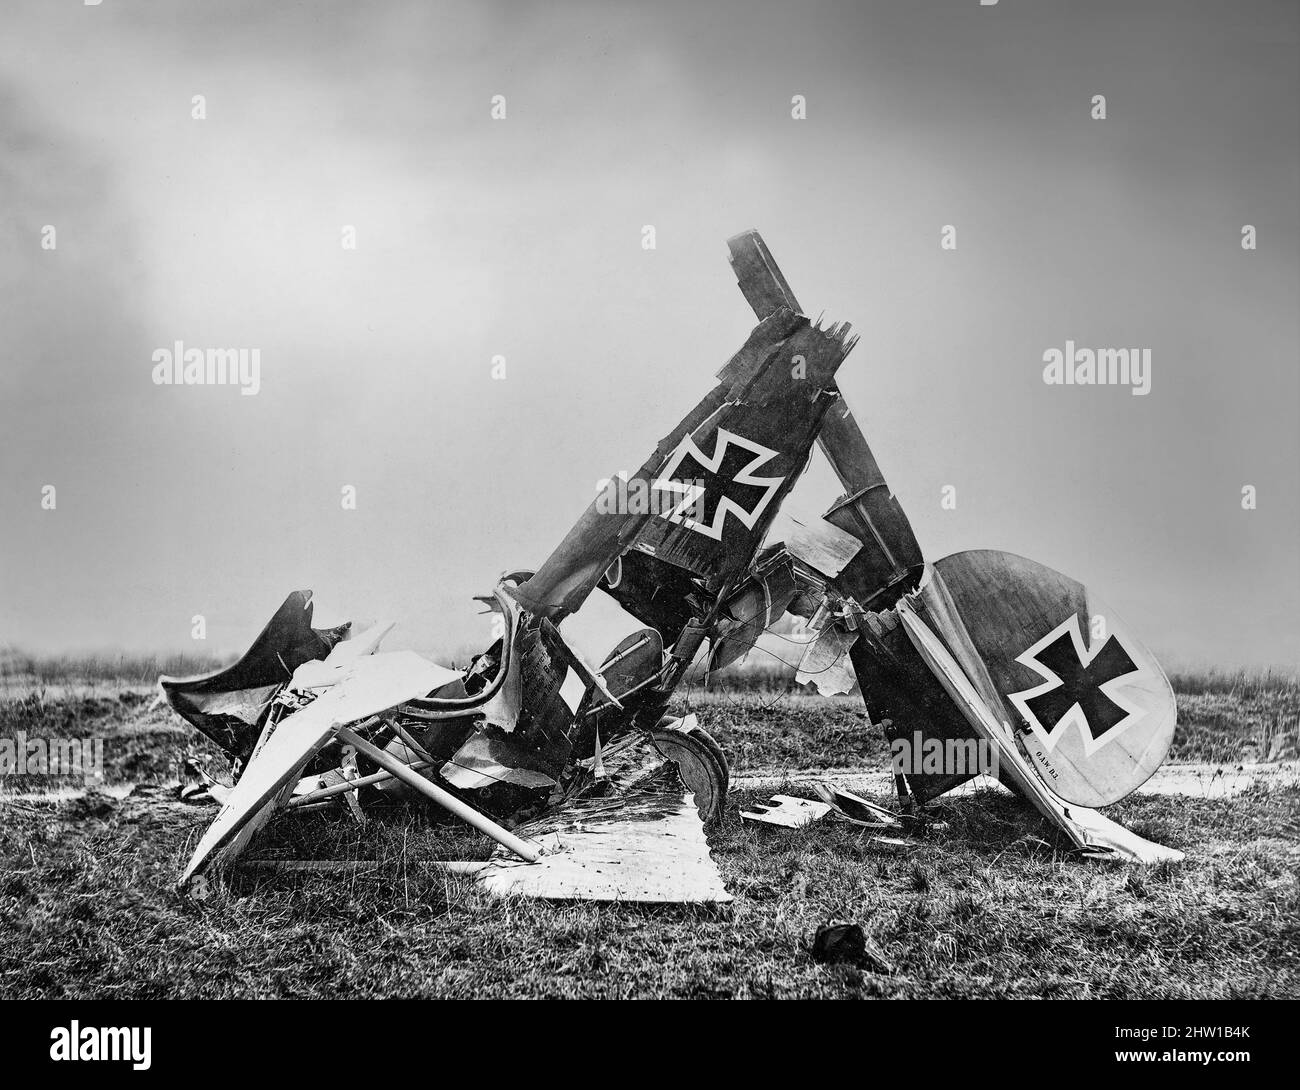 An early 20th century photograph of a crashed Albatros D.III biplane fighter aircraft used by the Imperial German Army Air Service (Luftstreitkräfte) during World War I. Stock Photo